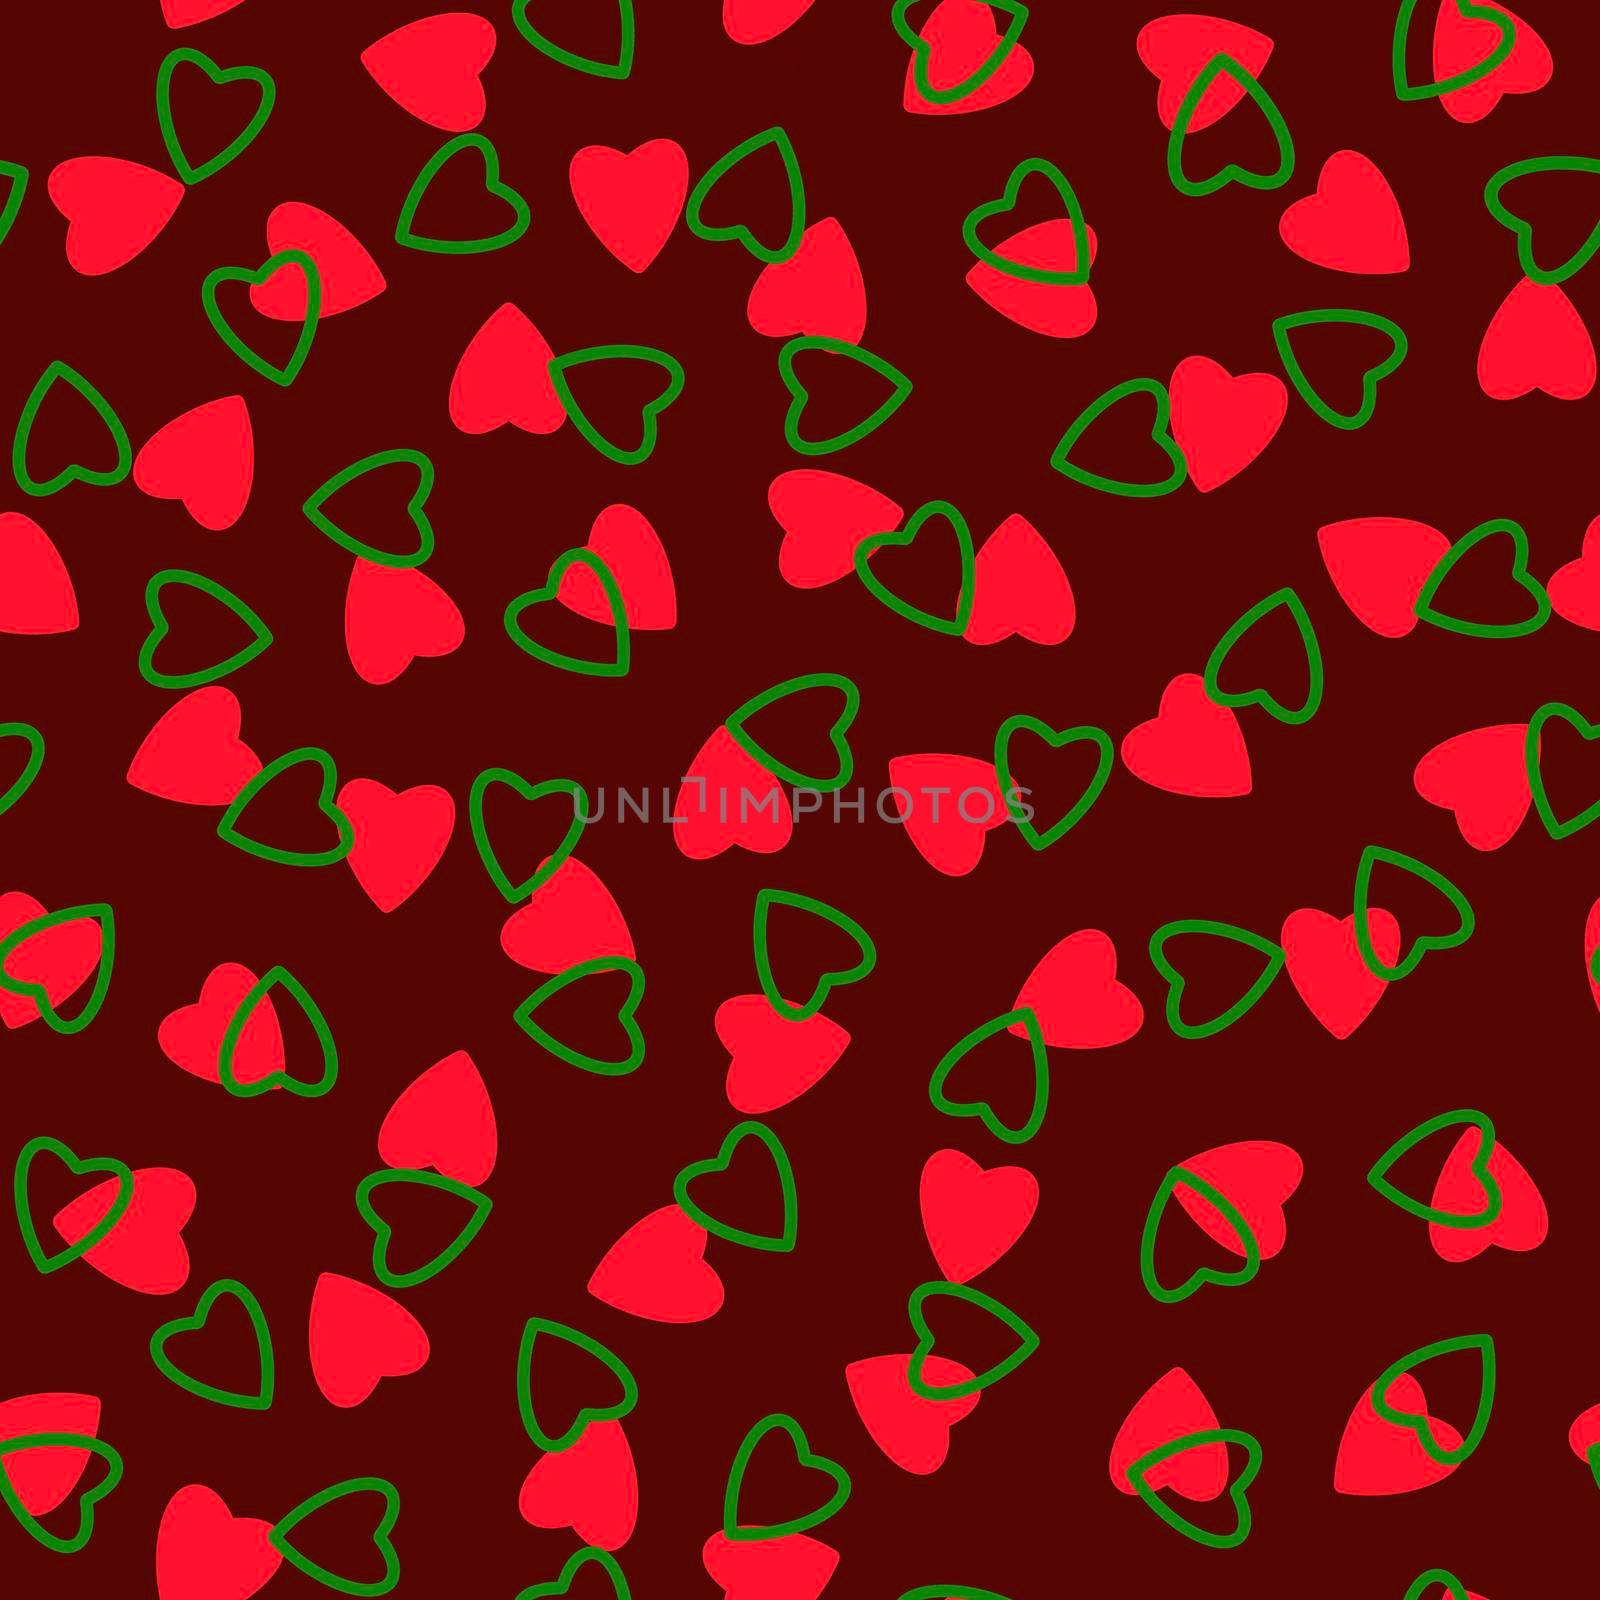 Simple hearts seamless pattern,endless chaotic texture made tiny heart silhouettes.Valentines,mothers day background.Great for Easter,wedding,scrapbook,gift wrapping paper,textiles.Red,green,burgundy by Angelsmoon